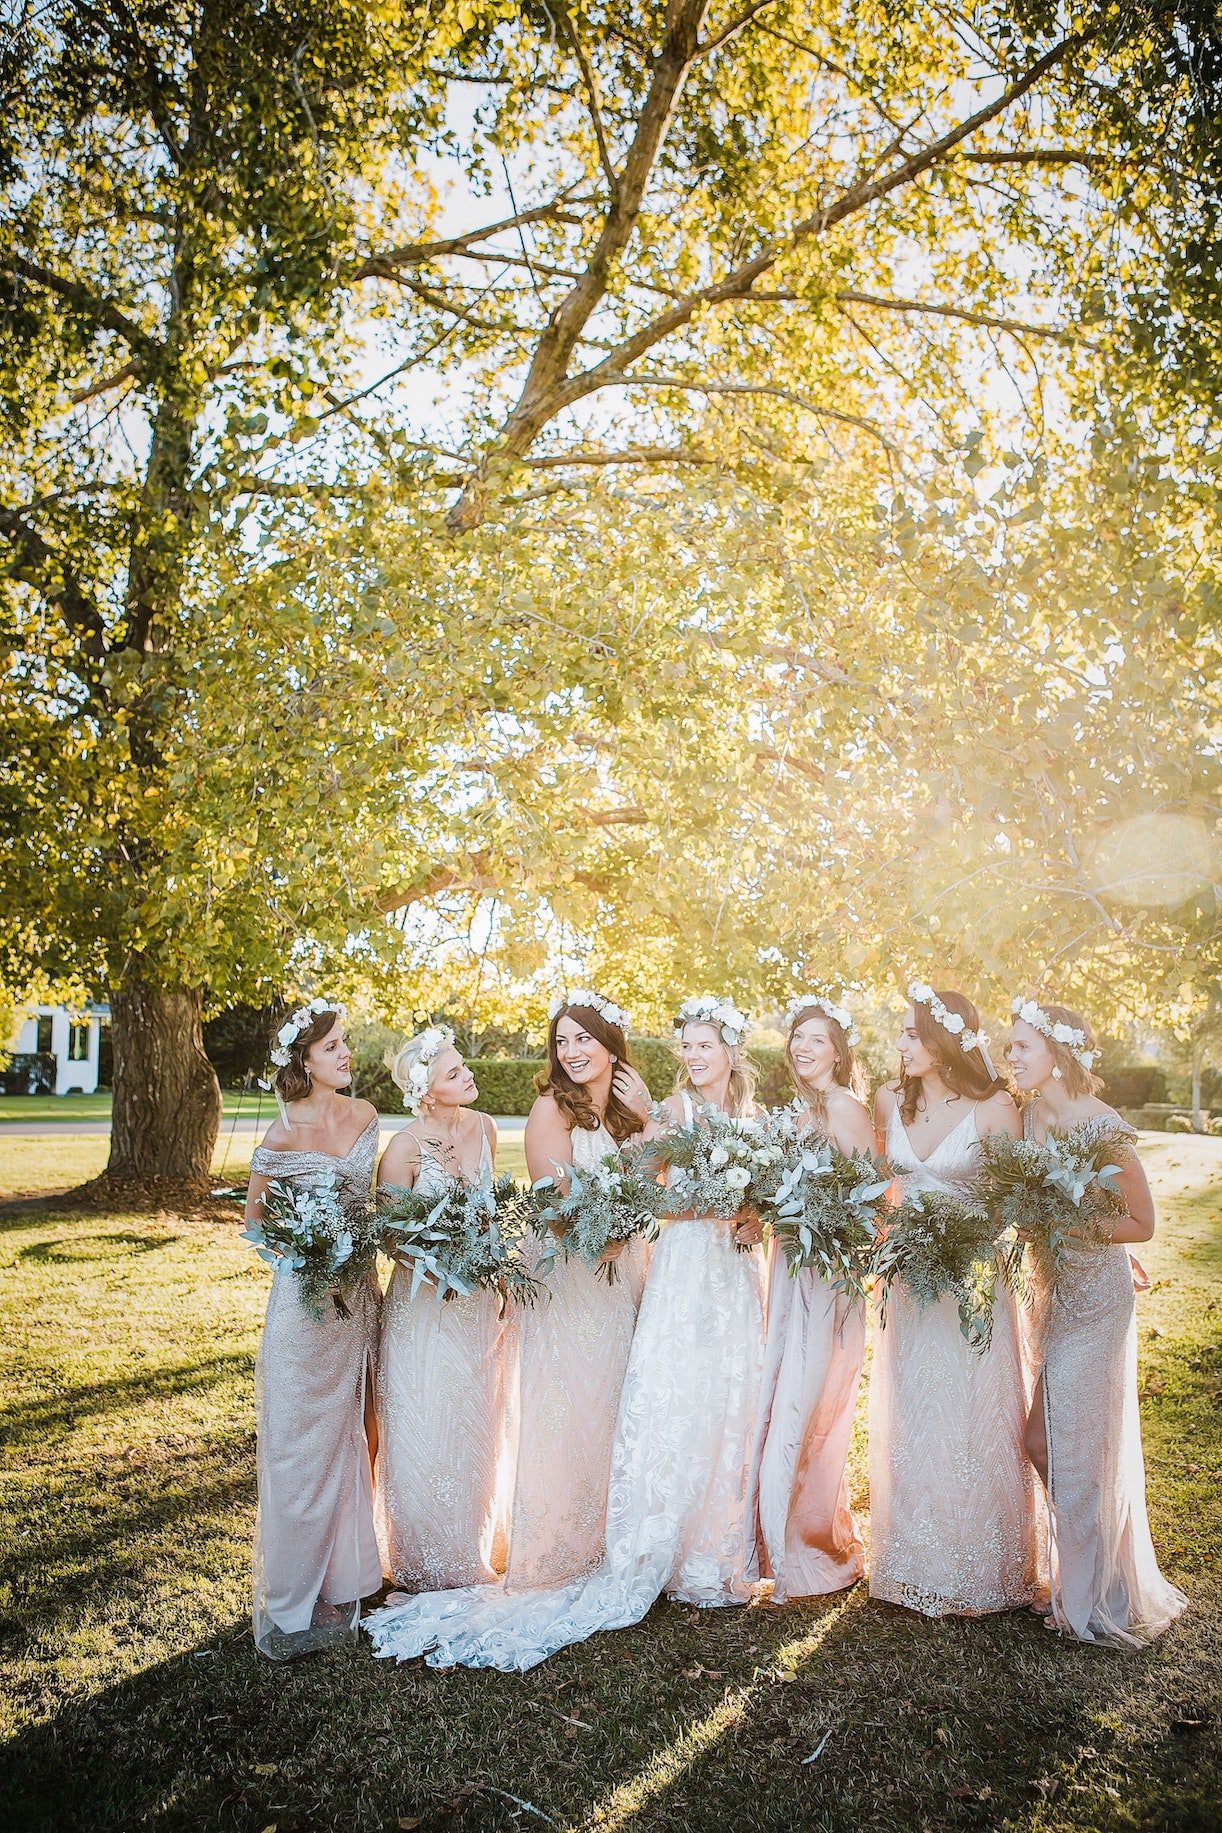 Mismatched Bridesmaids Dresses Break from Wedding Tradition